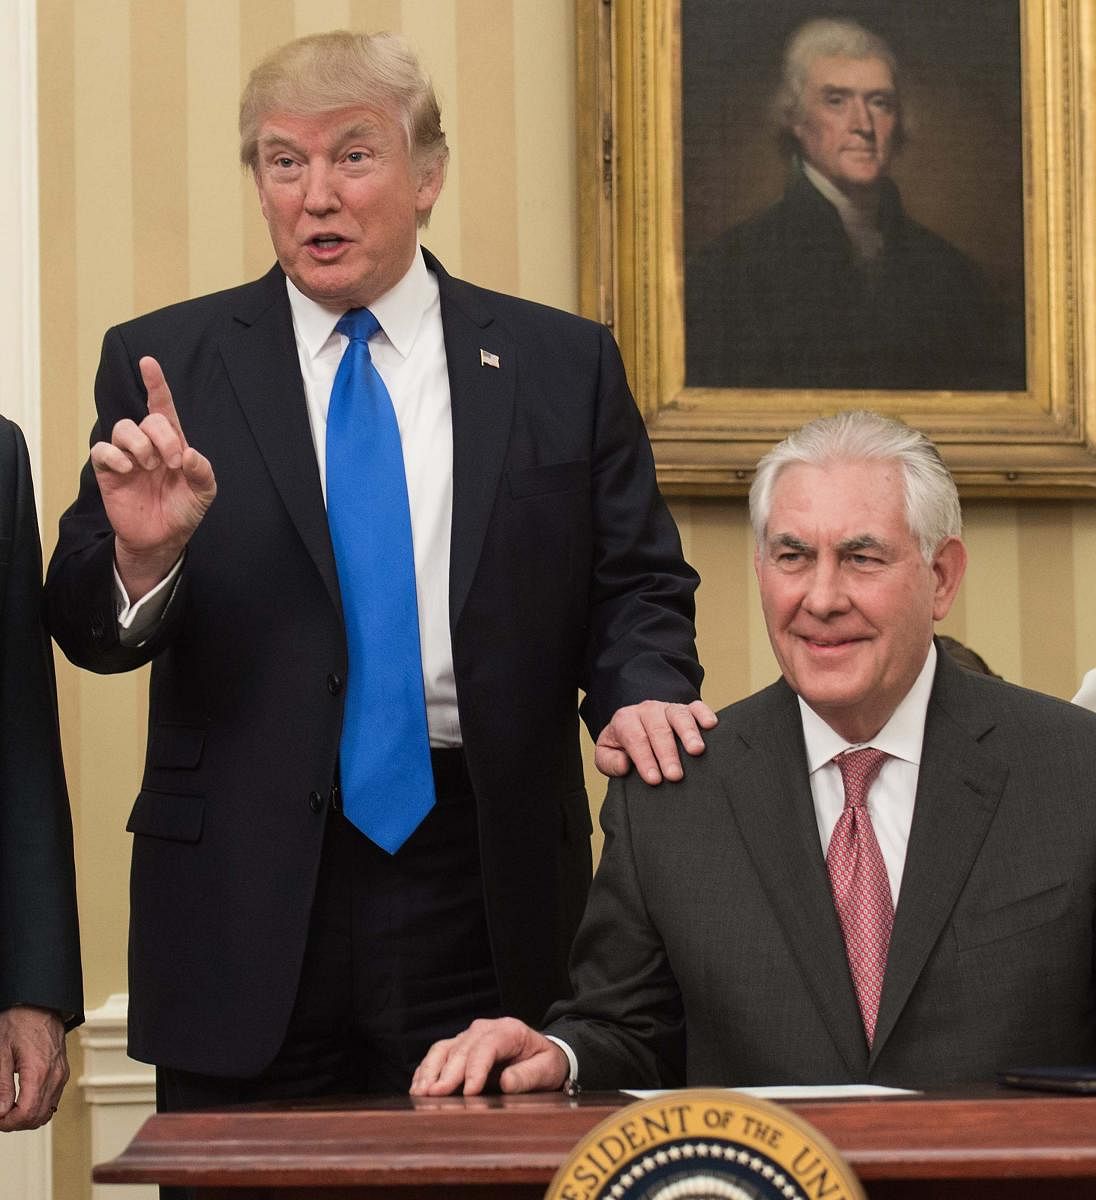 (FILES) In this file photo taken on February 1, 2017, US President Donald Trump (L) speaks after Rex Tillerson was sworn in as Secretary of State in the Oval Office at the White House in Washington, DC. - Trump on December 7, 2018, called his former secre